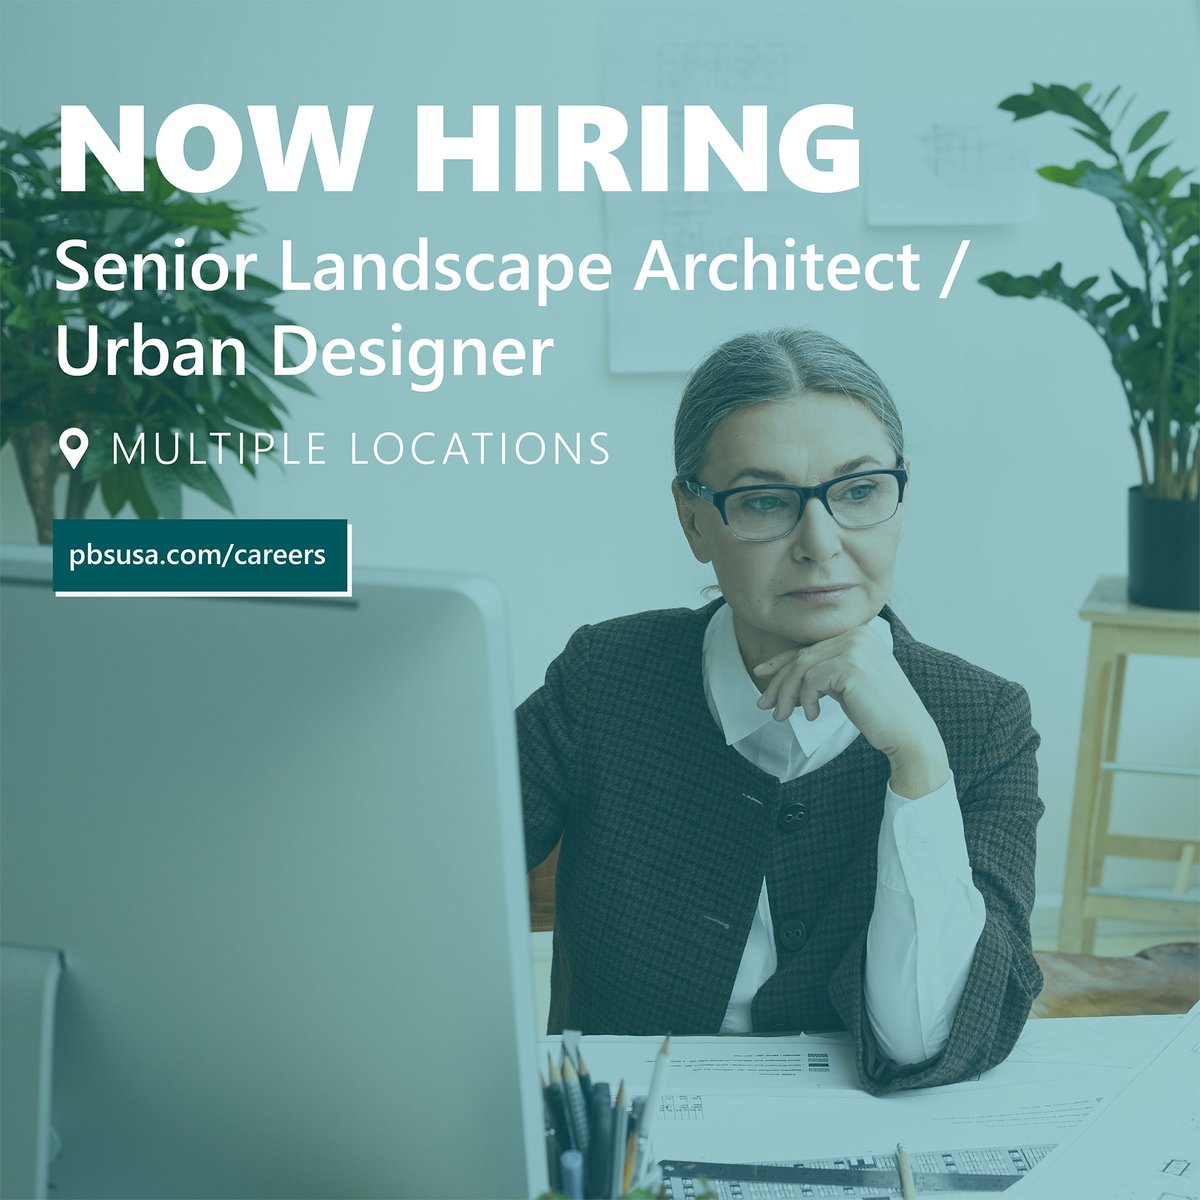 We’re hiring a Senior Landscape Architect / Urban Designer in Portland, Vancouver, Issaquah, or Seattle. 
Click for more information or to apply. boards.greenhouse.io/pbsusa/jobs/42… 

#LandscapeArchitecture #hiring #PDXJobs #SeattleJobs  #AECJobs